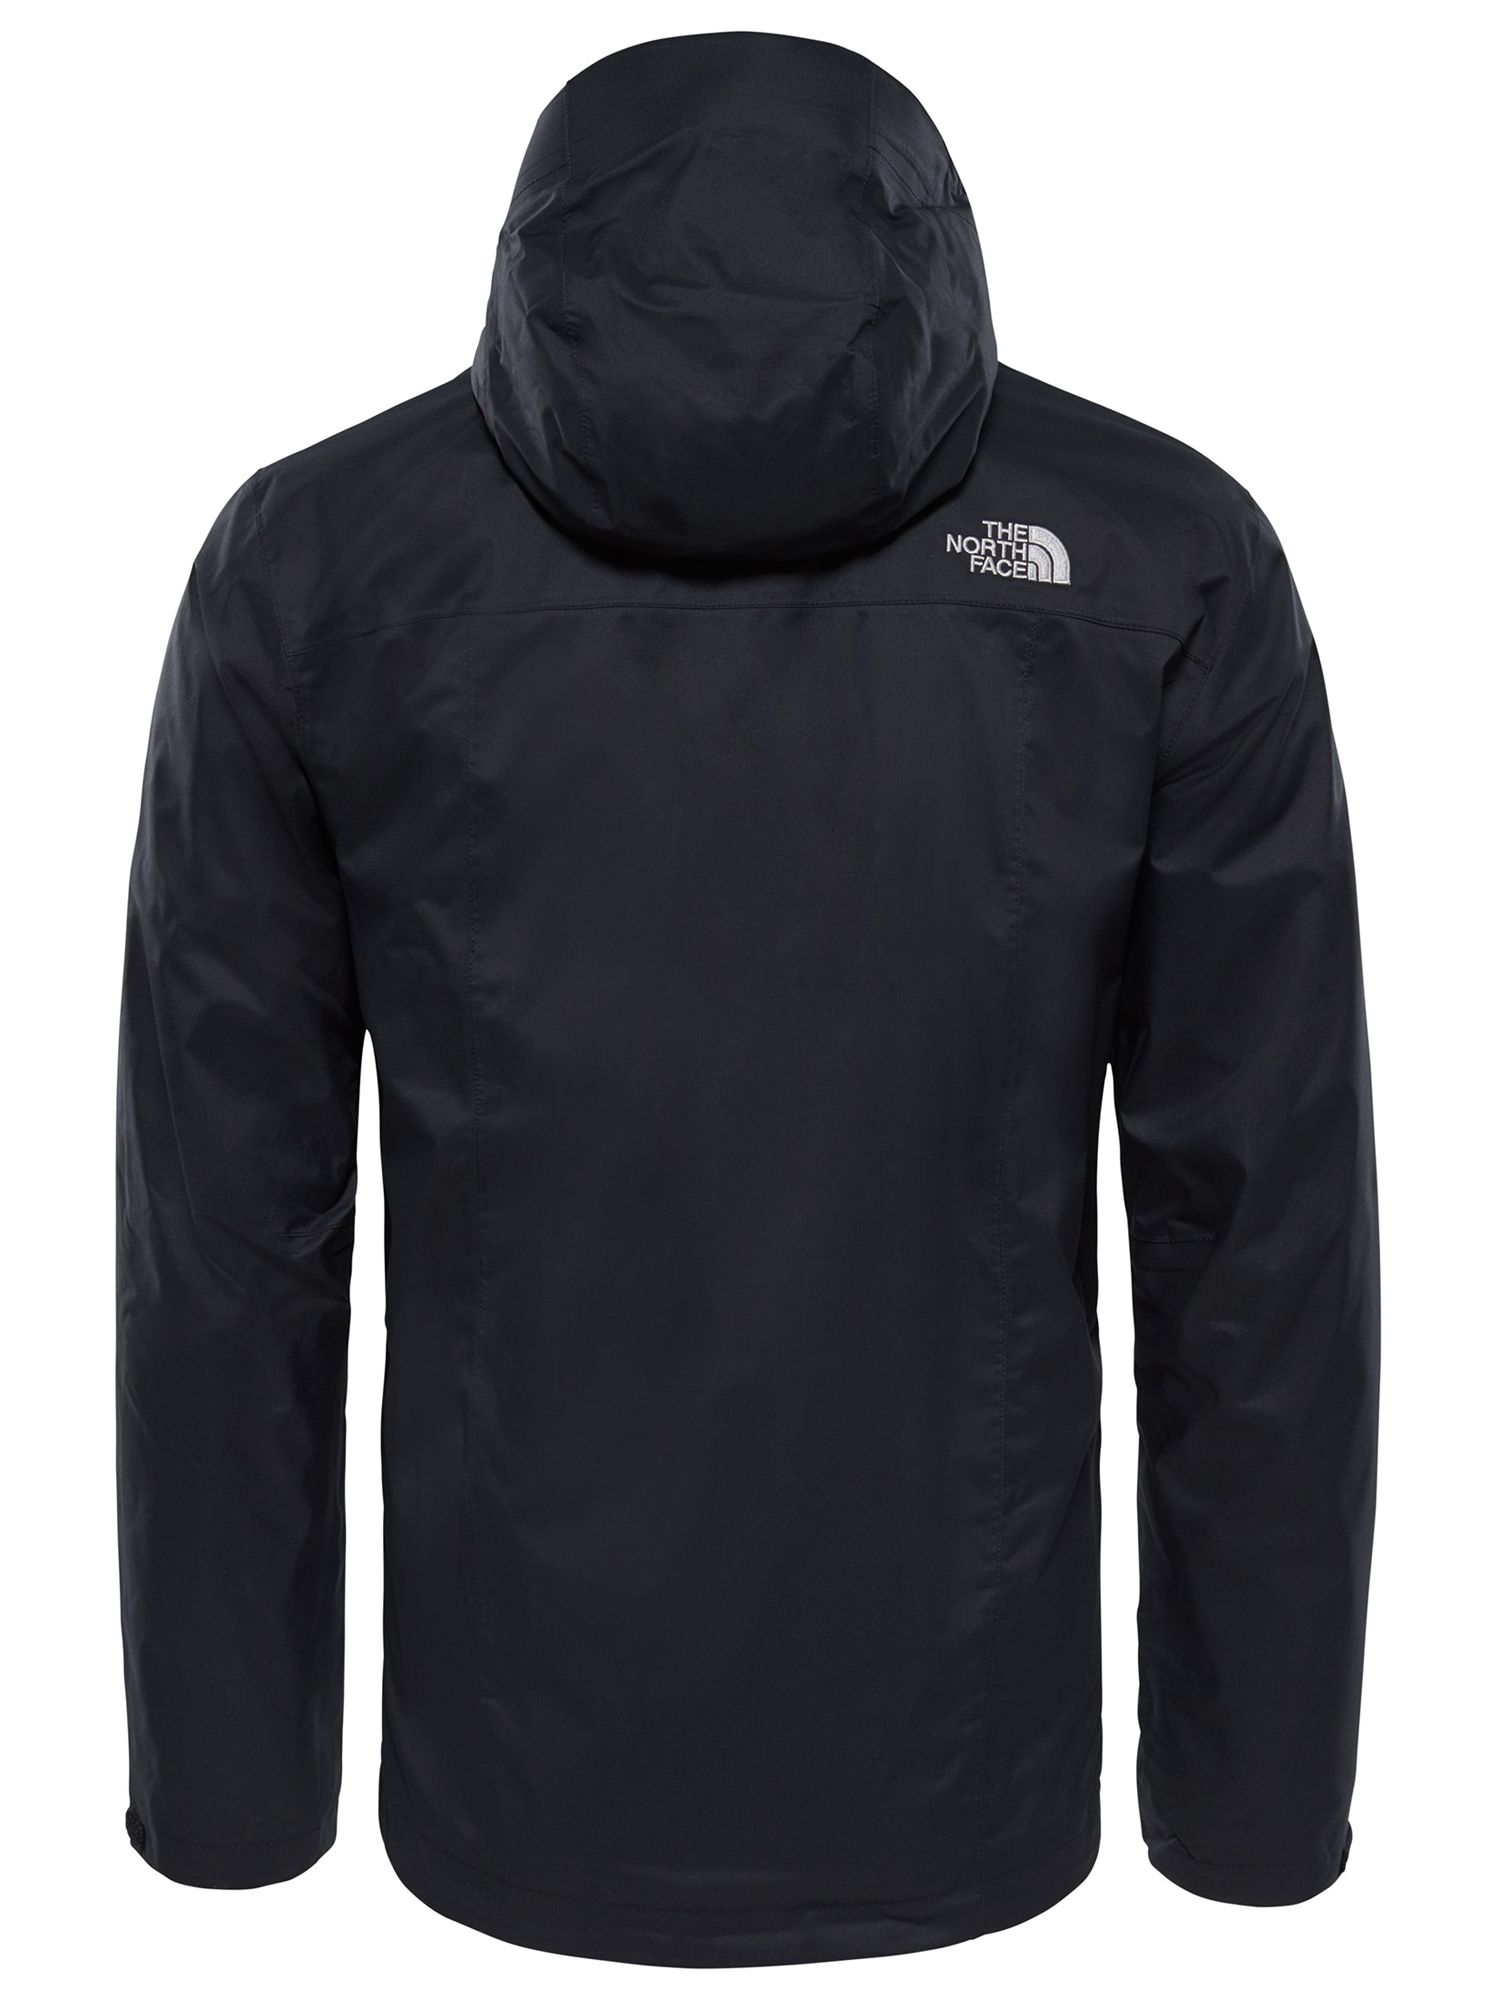 The North Face Evolve II Triclimate 3-in-1 Waterproof Men's Jacket, Black, S